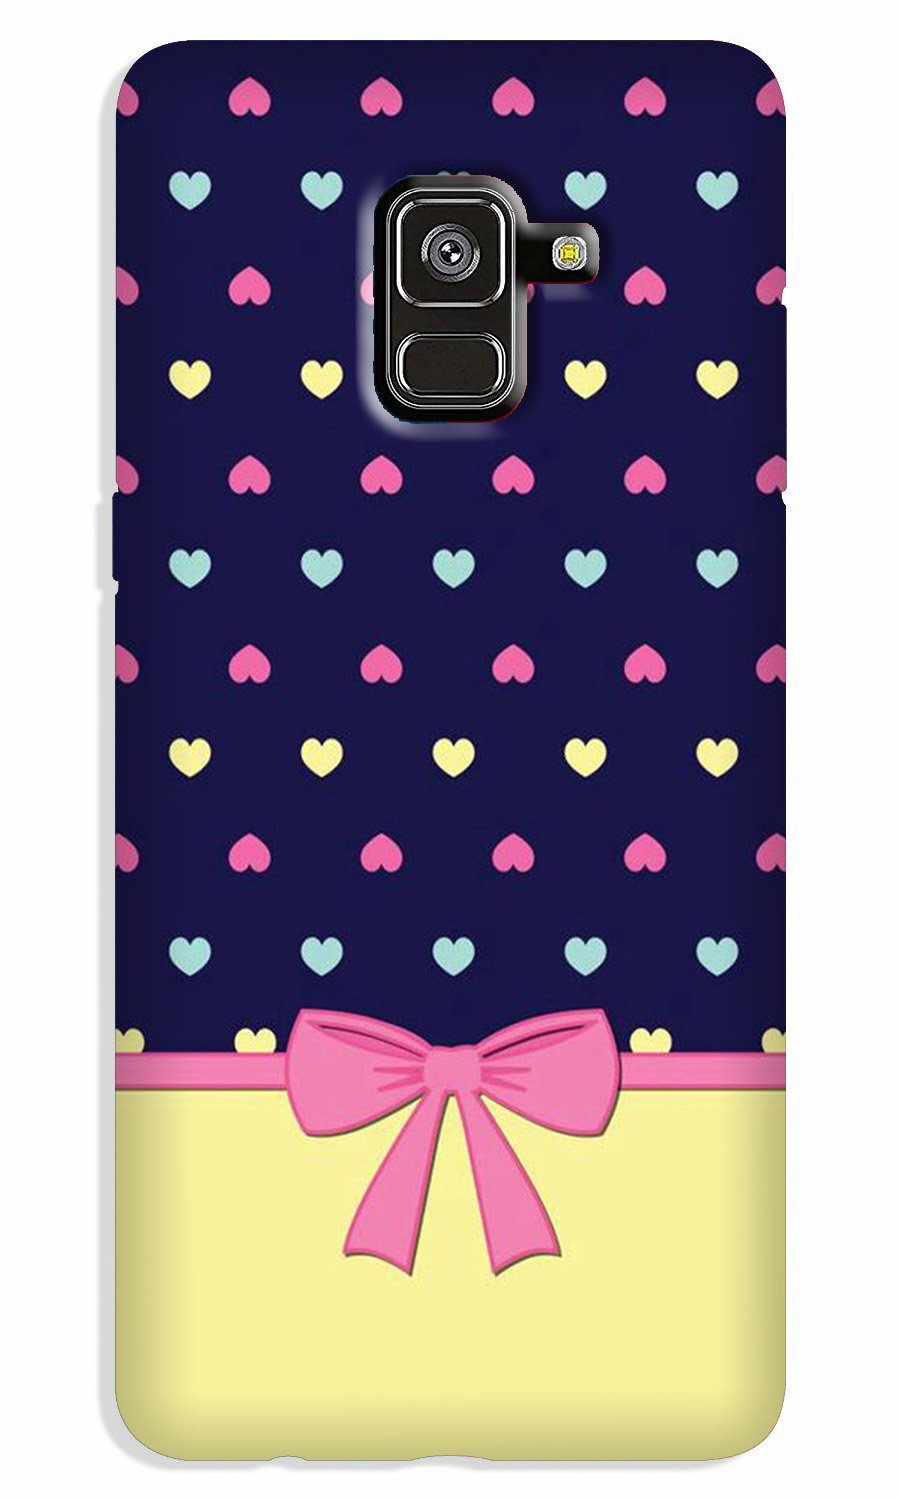 Gift Wrap5 Case for Galaxy J6 / On6